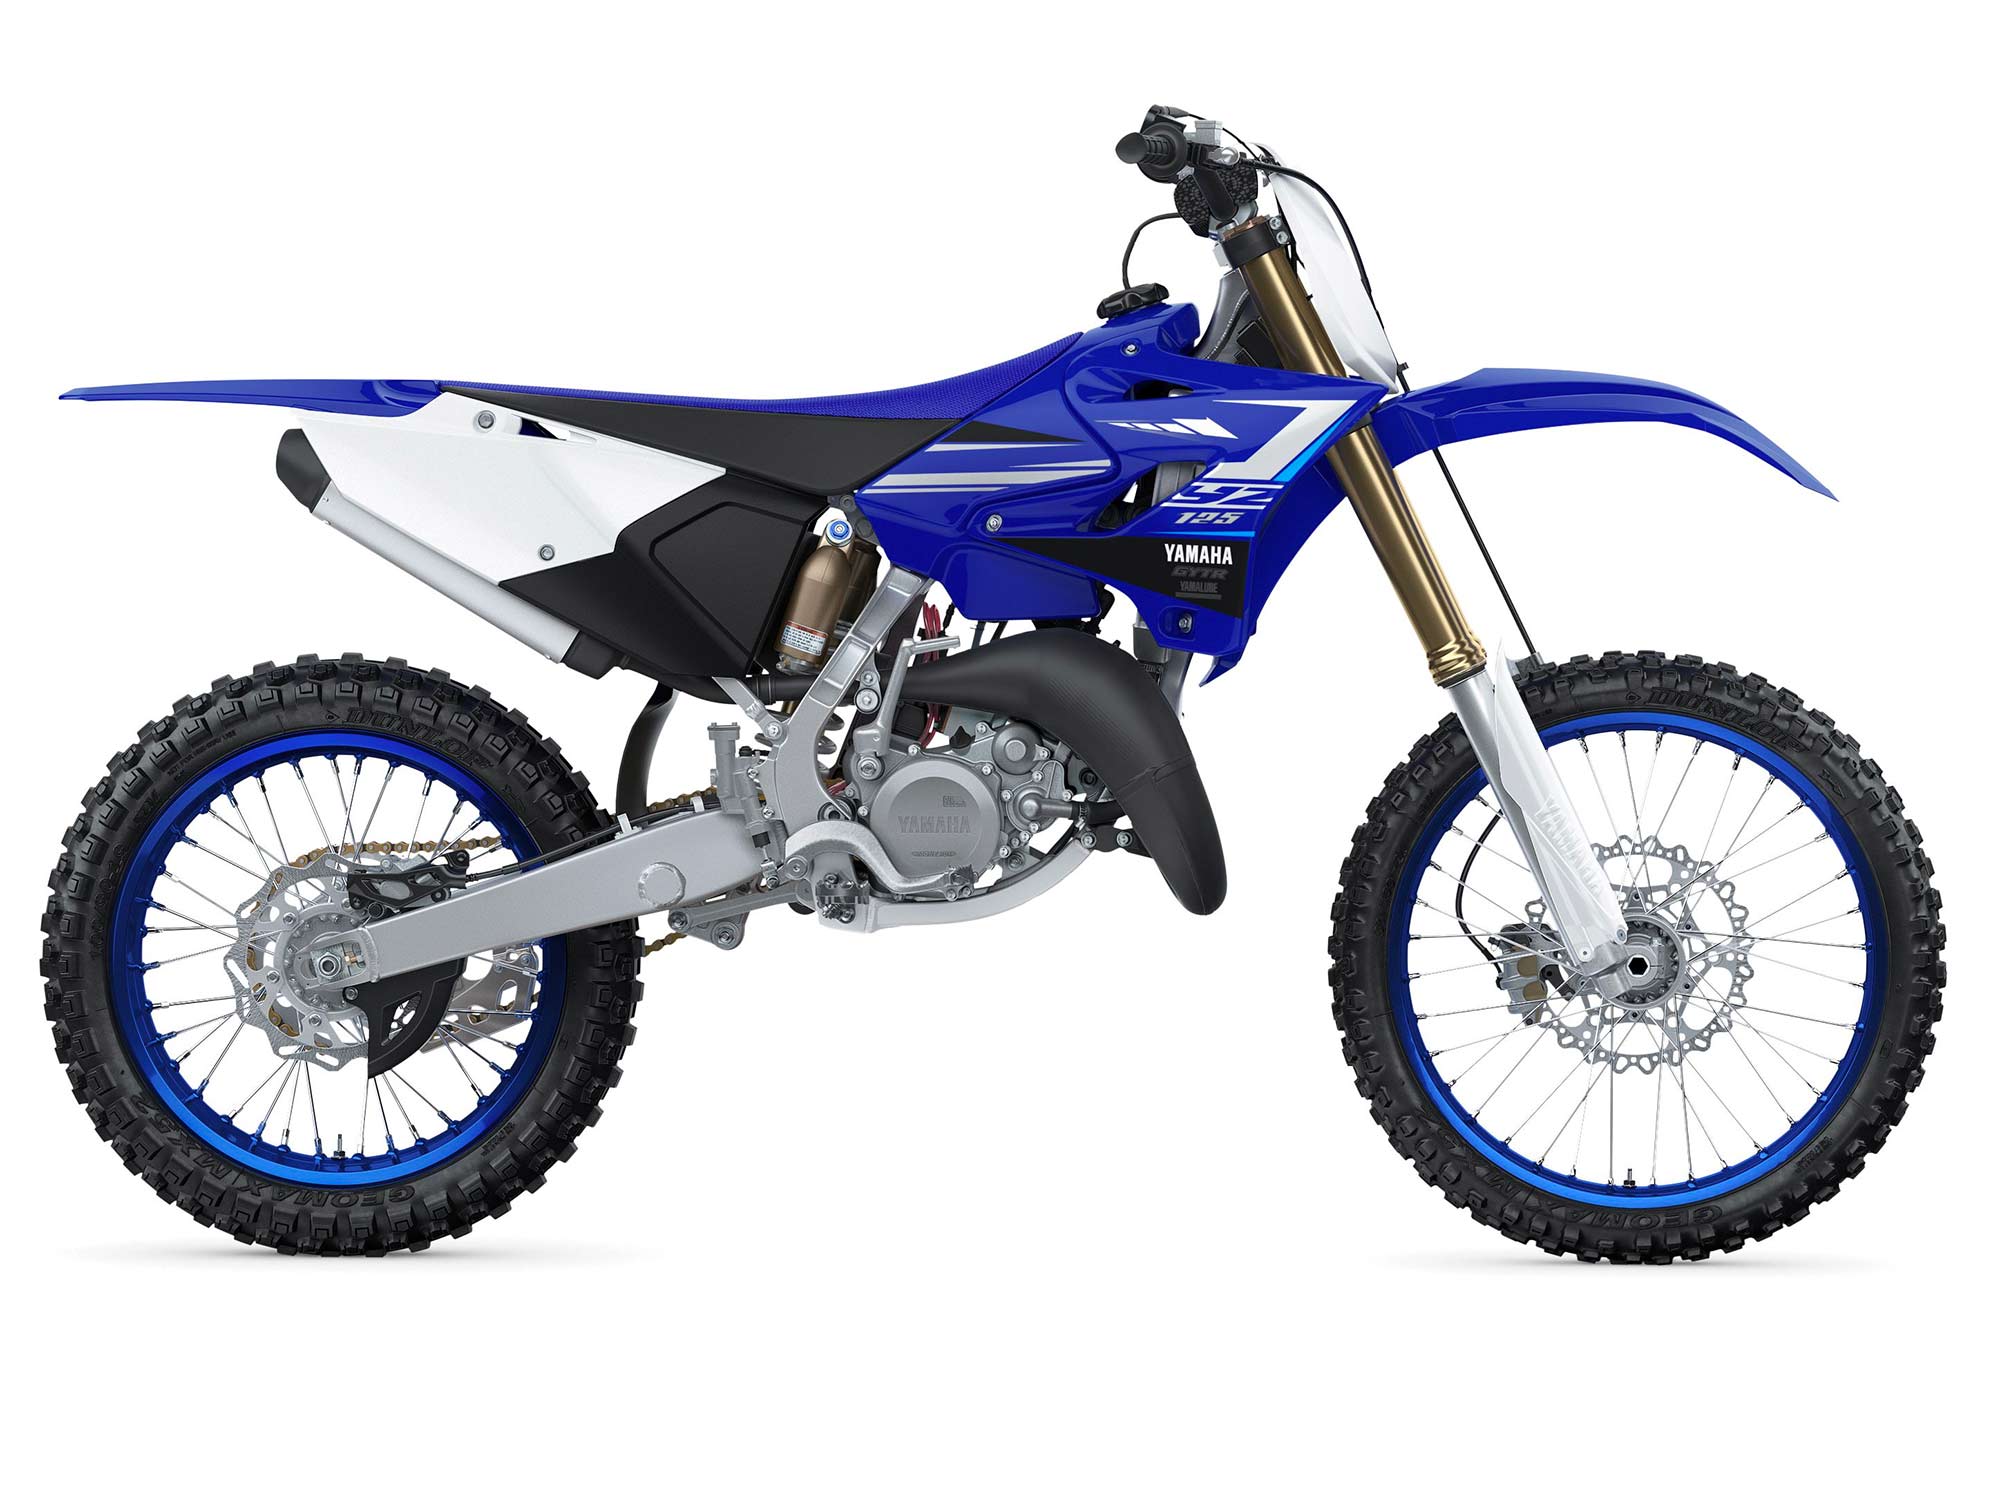 Yamaha YZ125 Review & Specs: Why It's NOT Good For You - Motocross